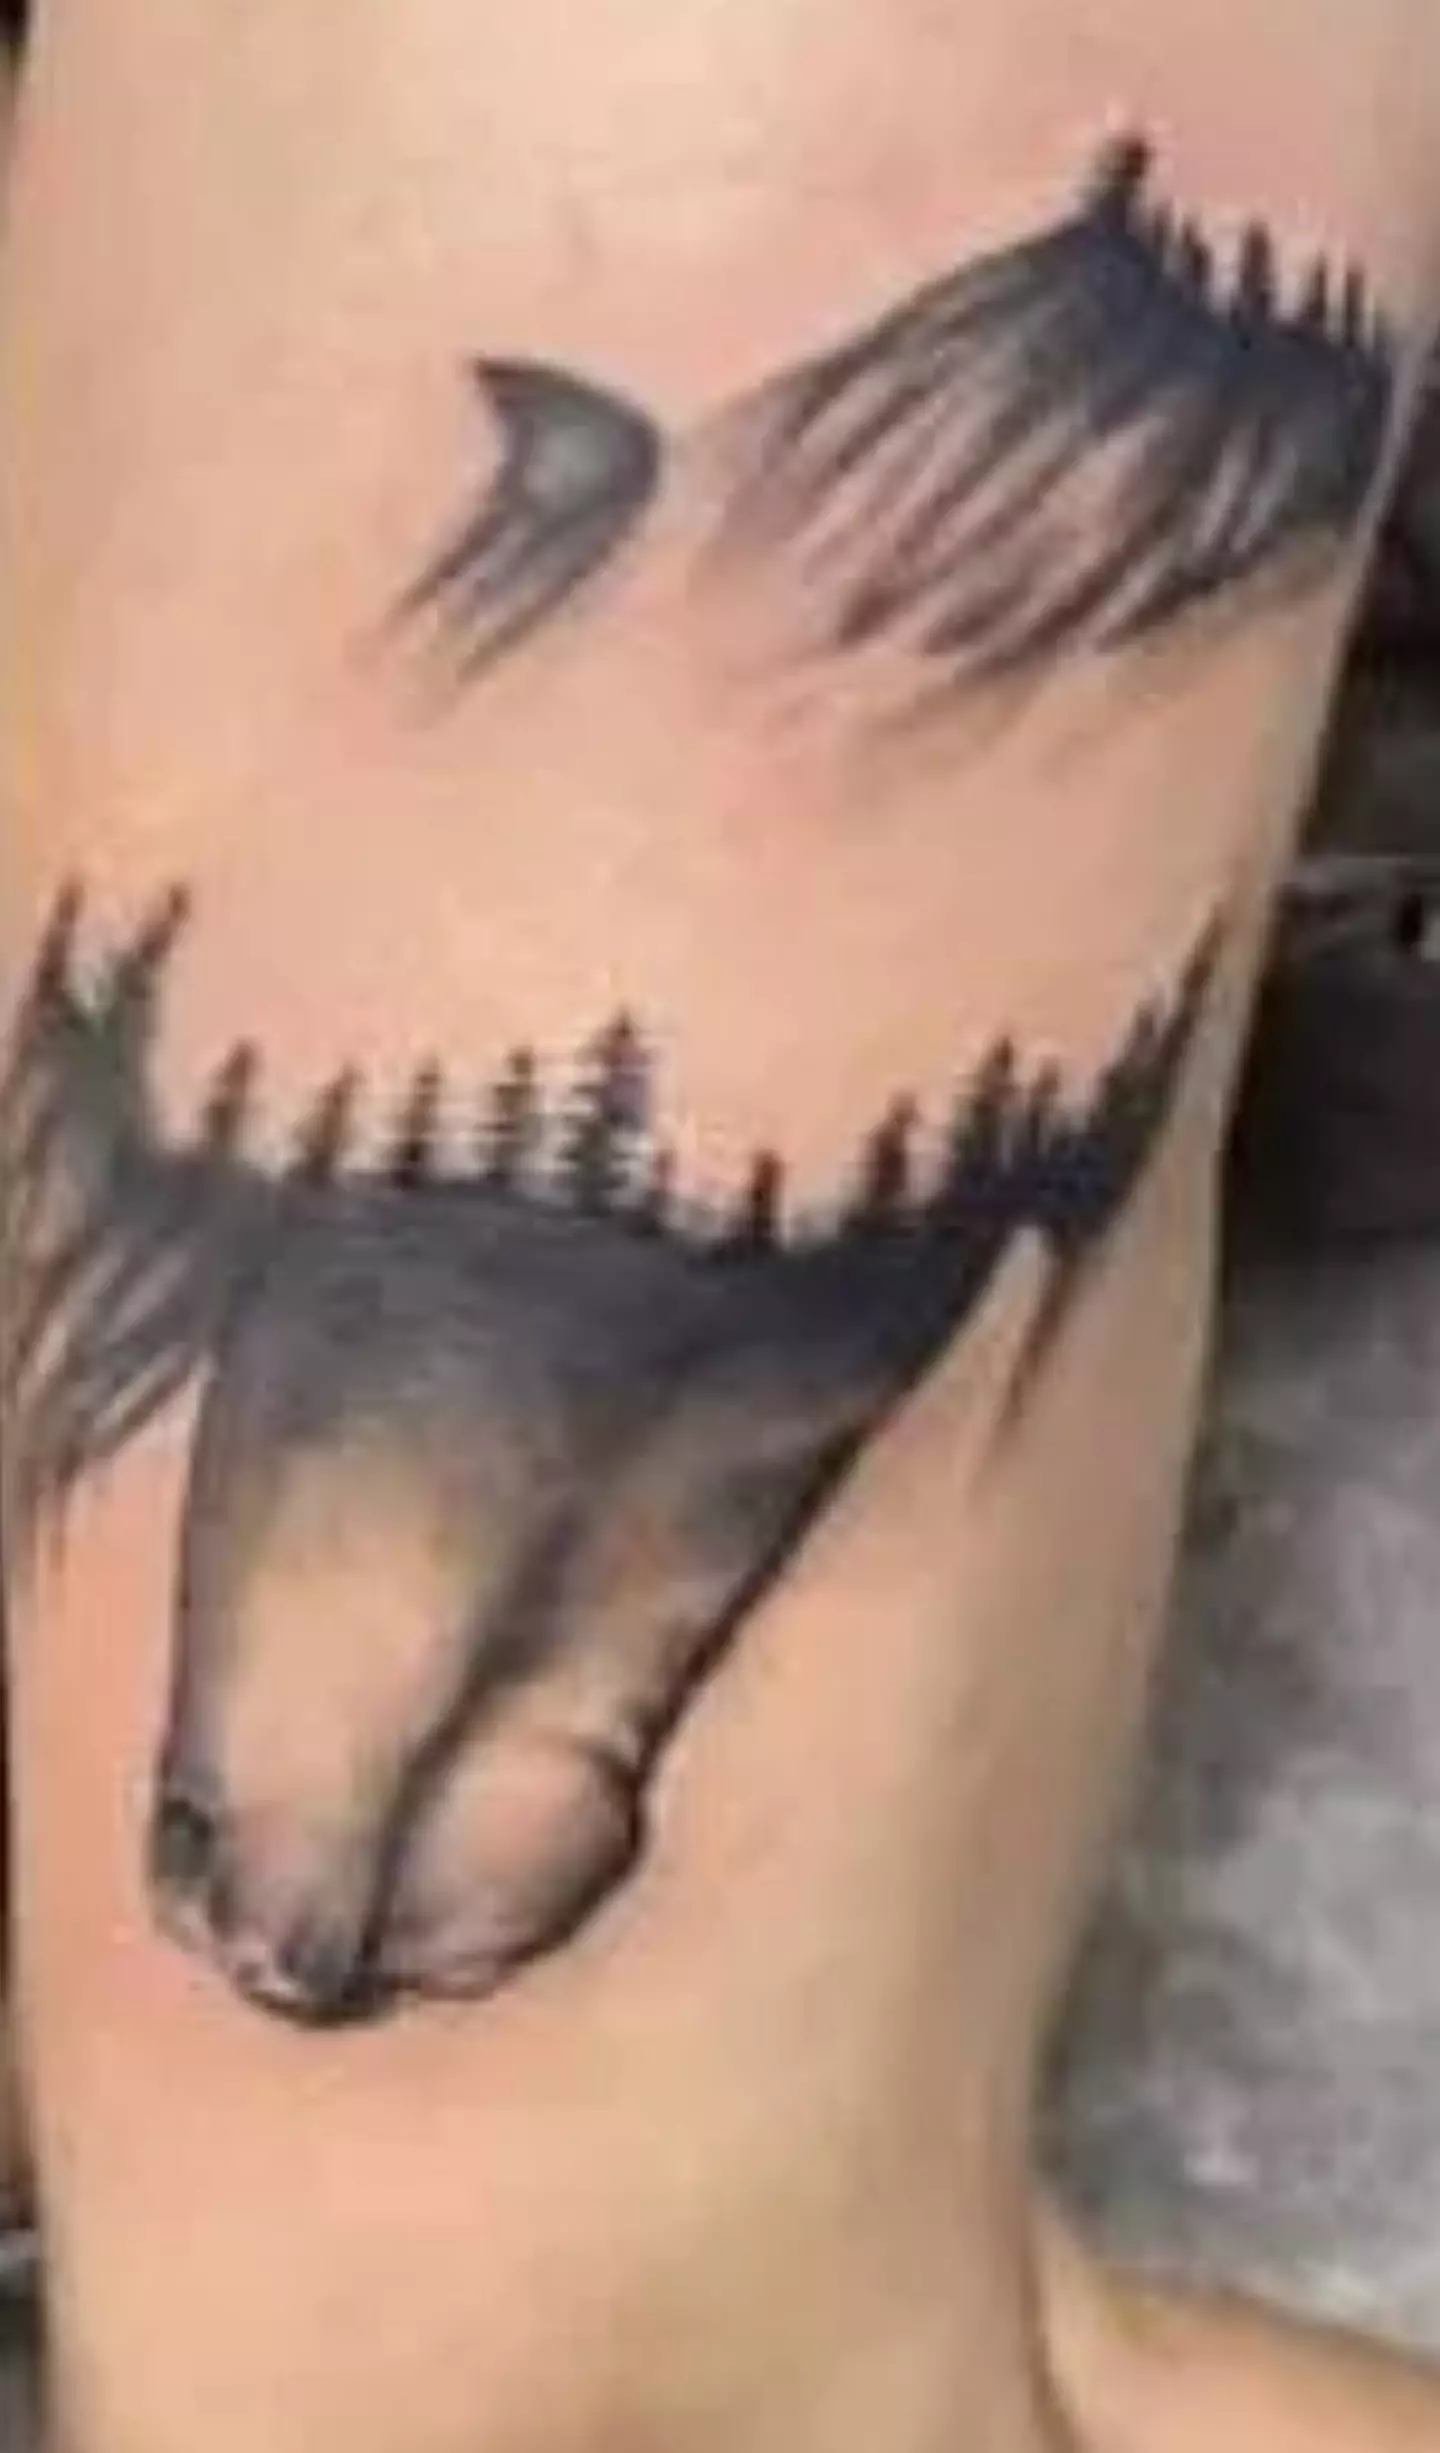 This horse tattoo apparently looks like something else (